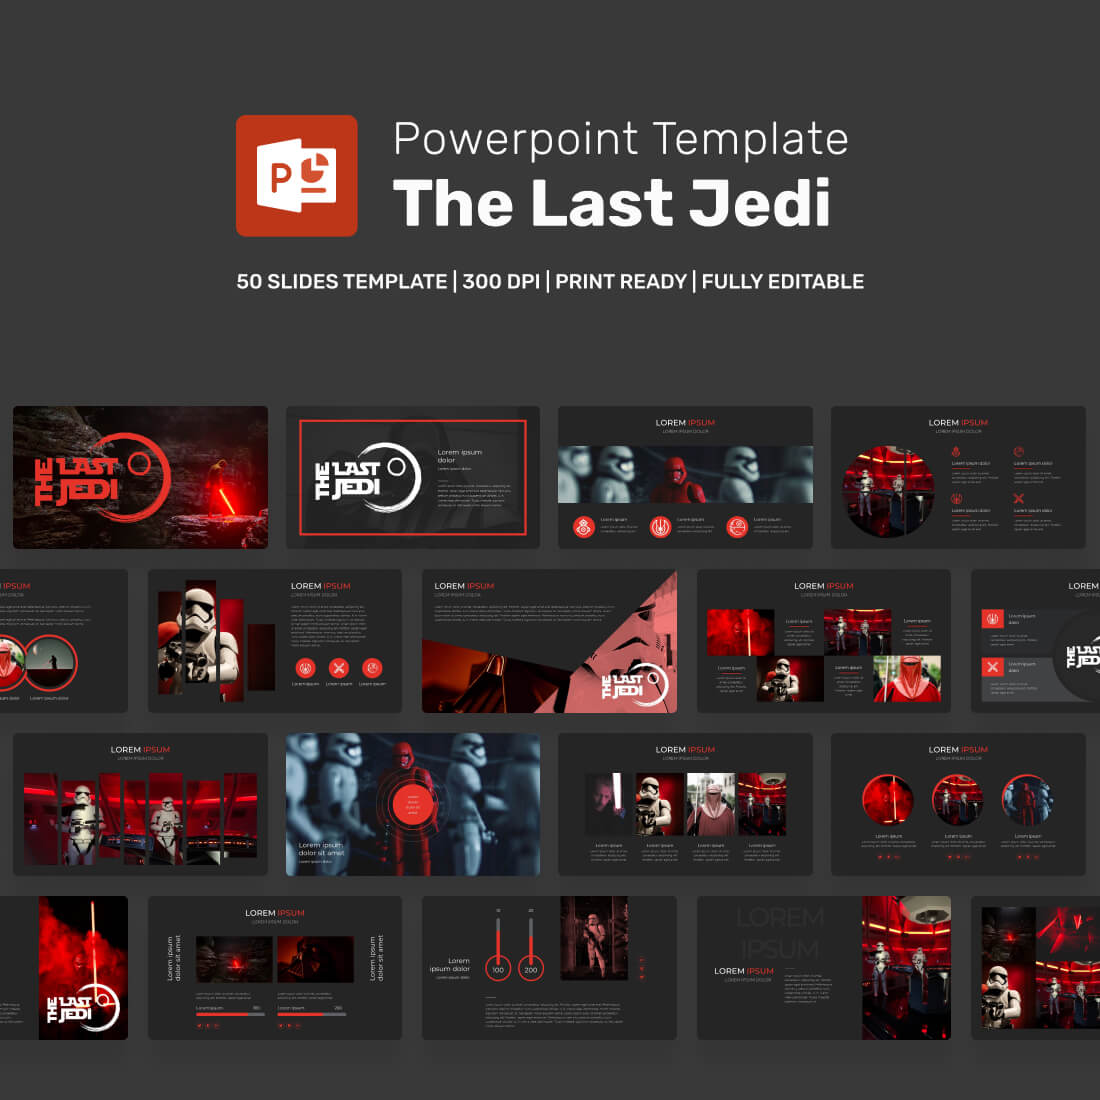 The Last Jedi Powerpoint Template preview.